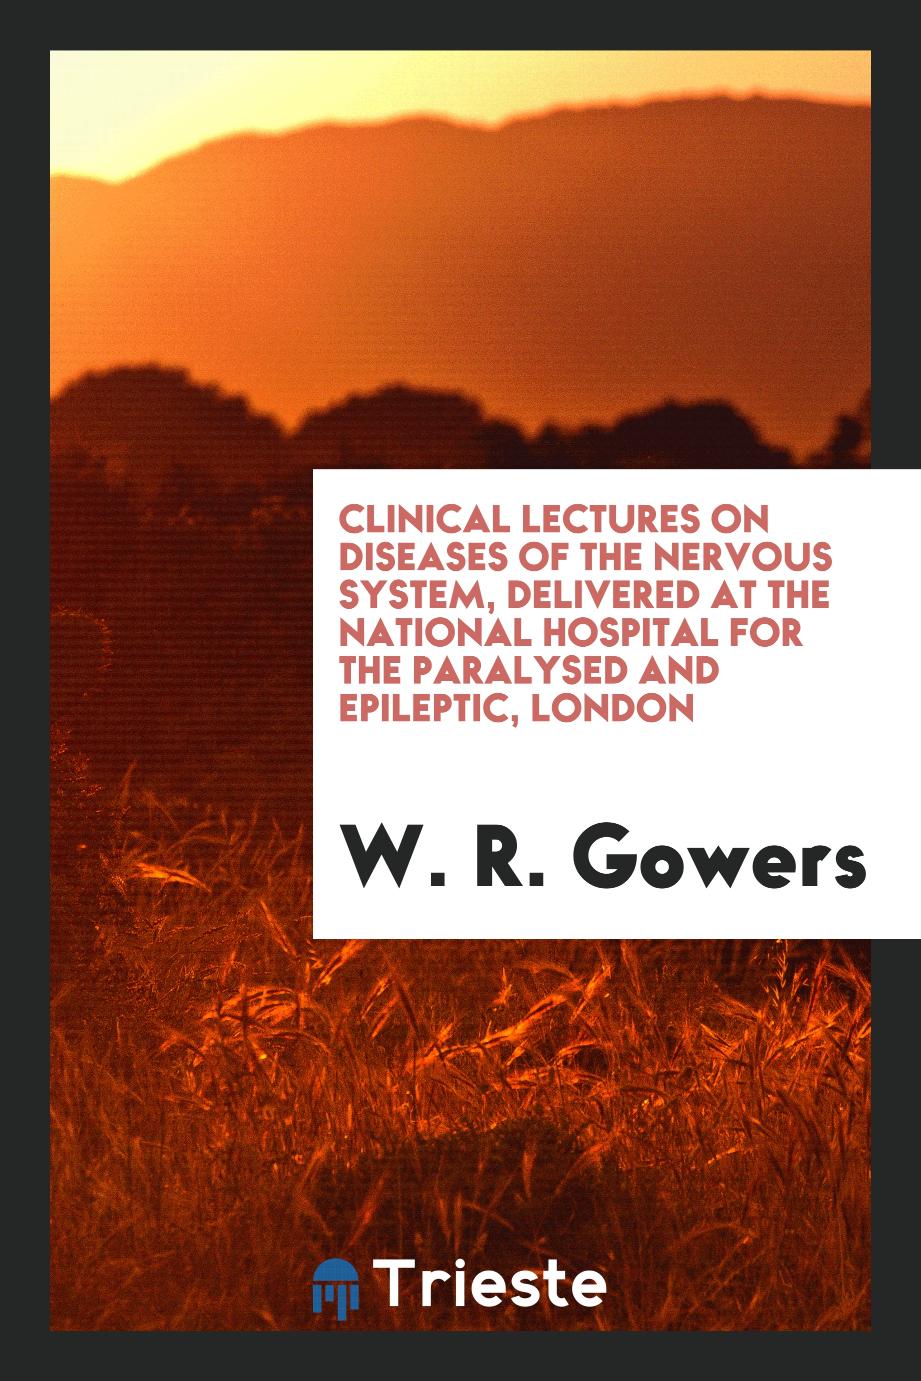 Clinical lectures on diseases of the nervous system, delivered at the National Hospital for the paralysed and epileptic, London